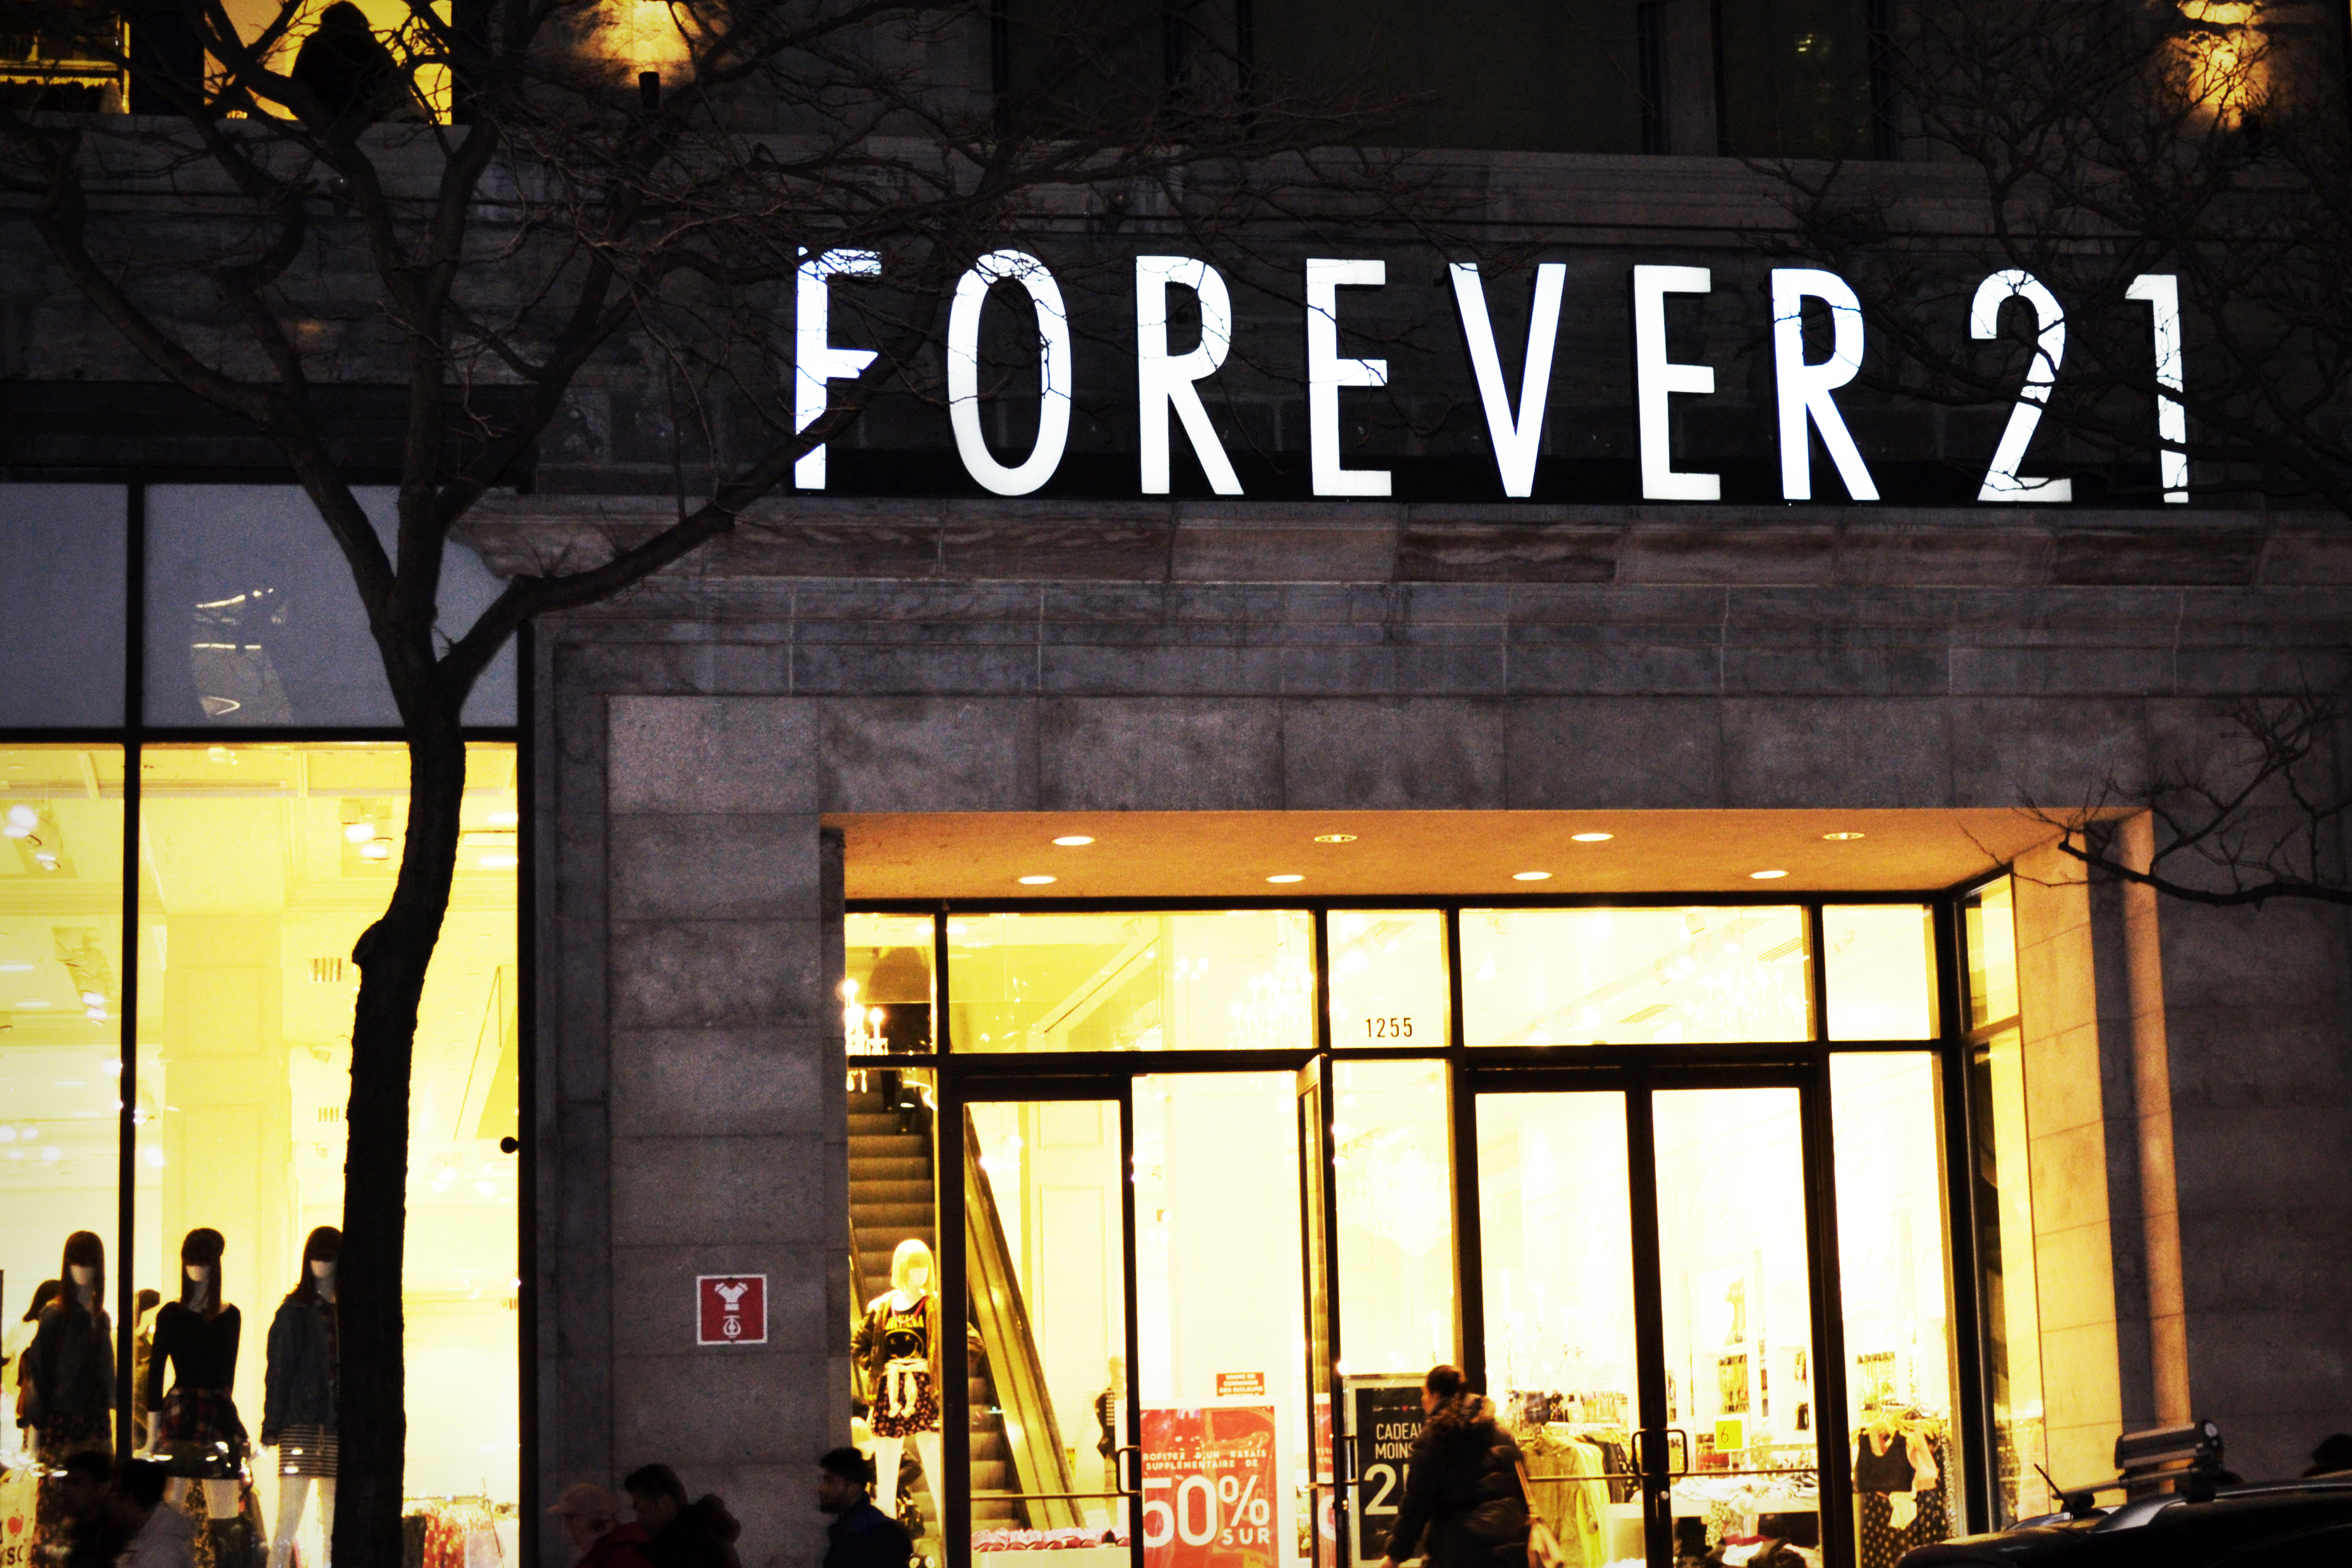 21 Stores Like Forever 21 for Affordable & Fashionable Clothing